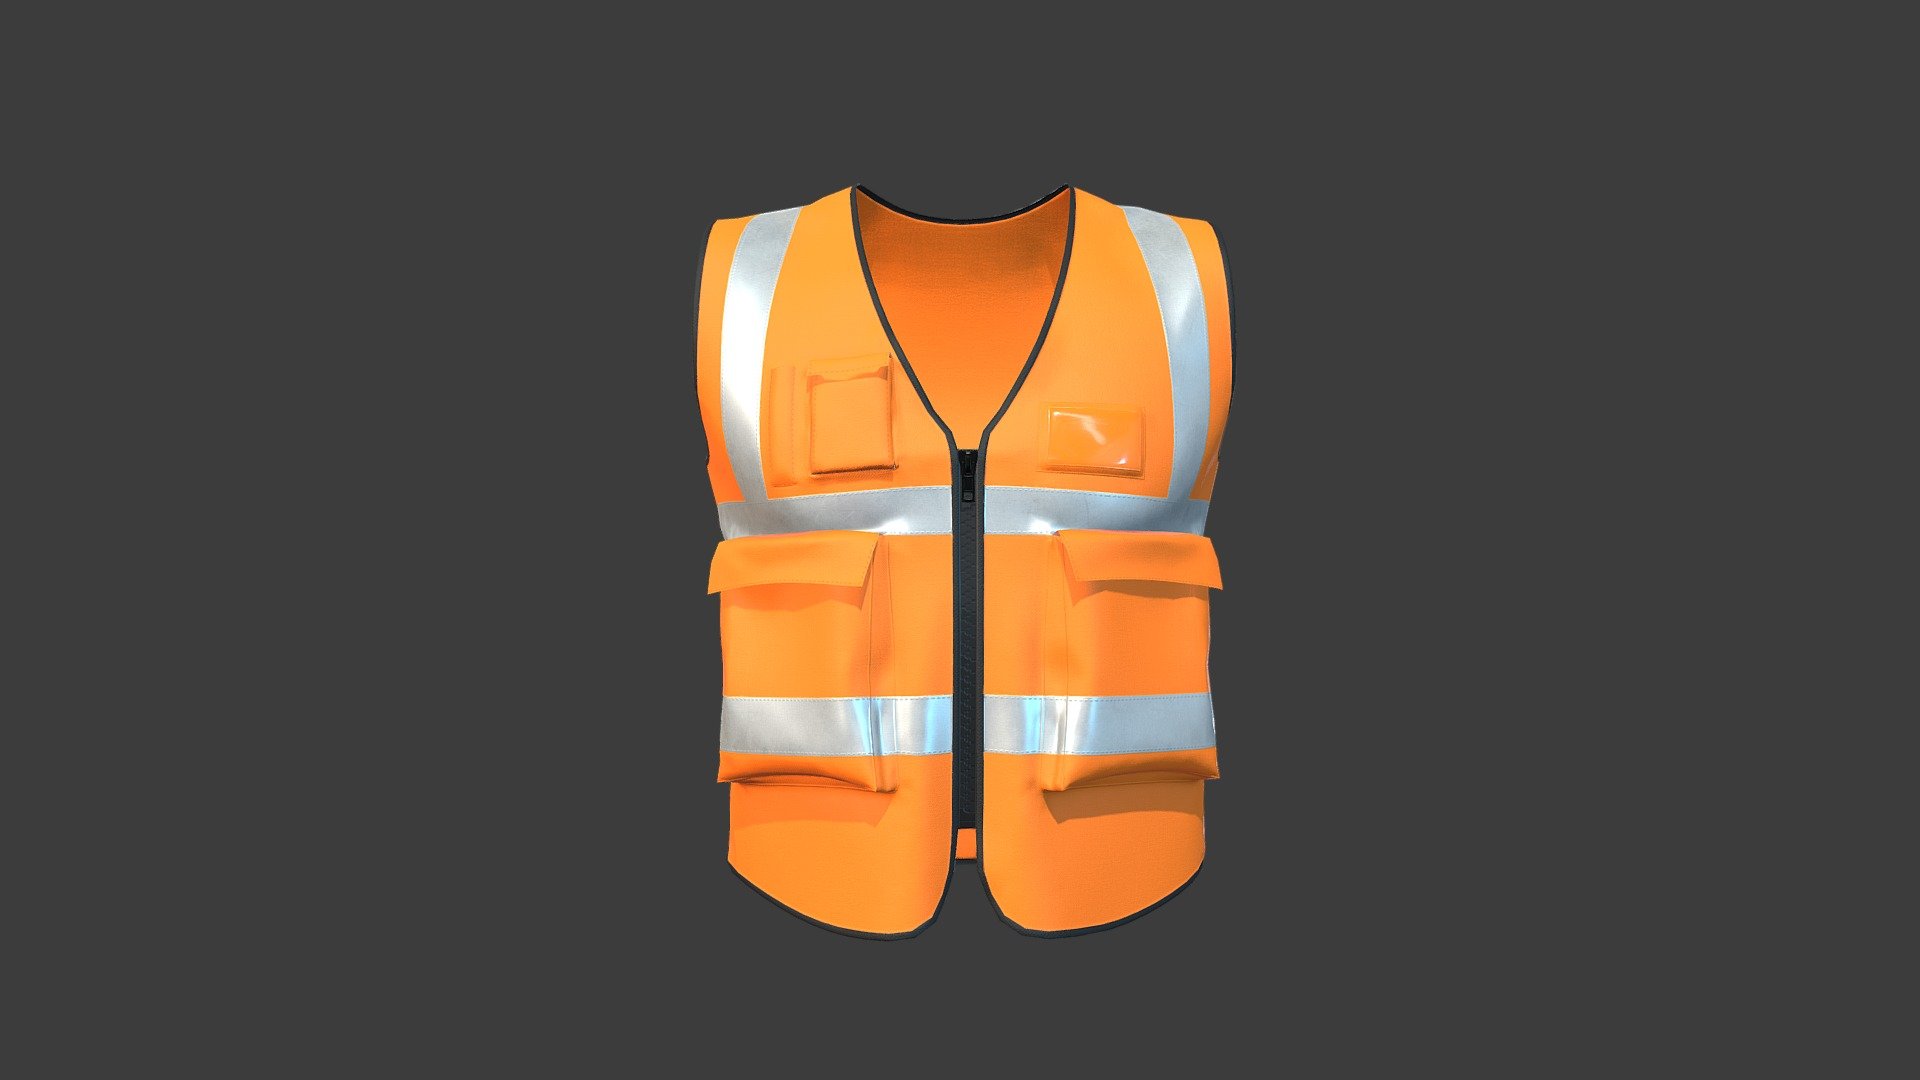 Construction Vest Reflective lowpoly pbr 3d model with 4K Textures.
This model is suitable for Games, AR, VR and real-time visualization.
* PBR 4K Textures.
* Can be used for AR, VR, Realtime Visualizations &amp; Games.
* Kindly contact me, if you need any support regarding this model. Happy to help 3d model